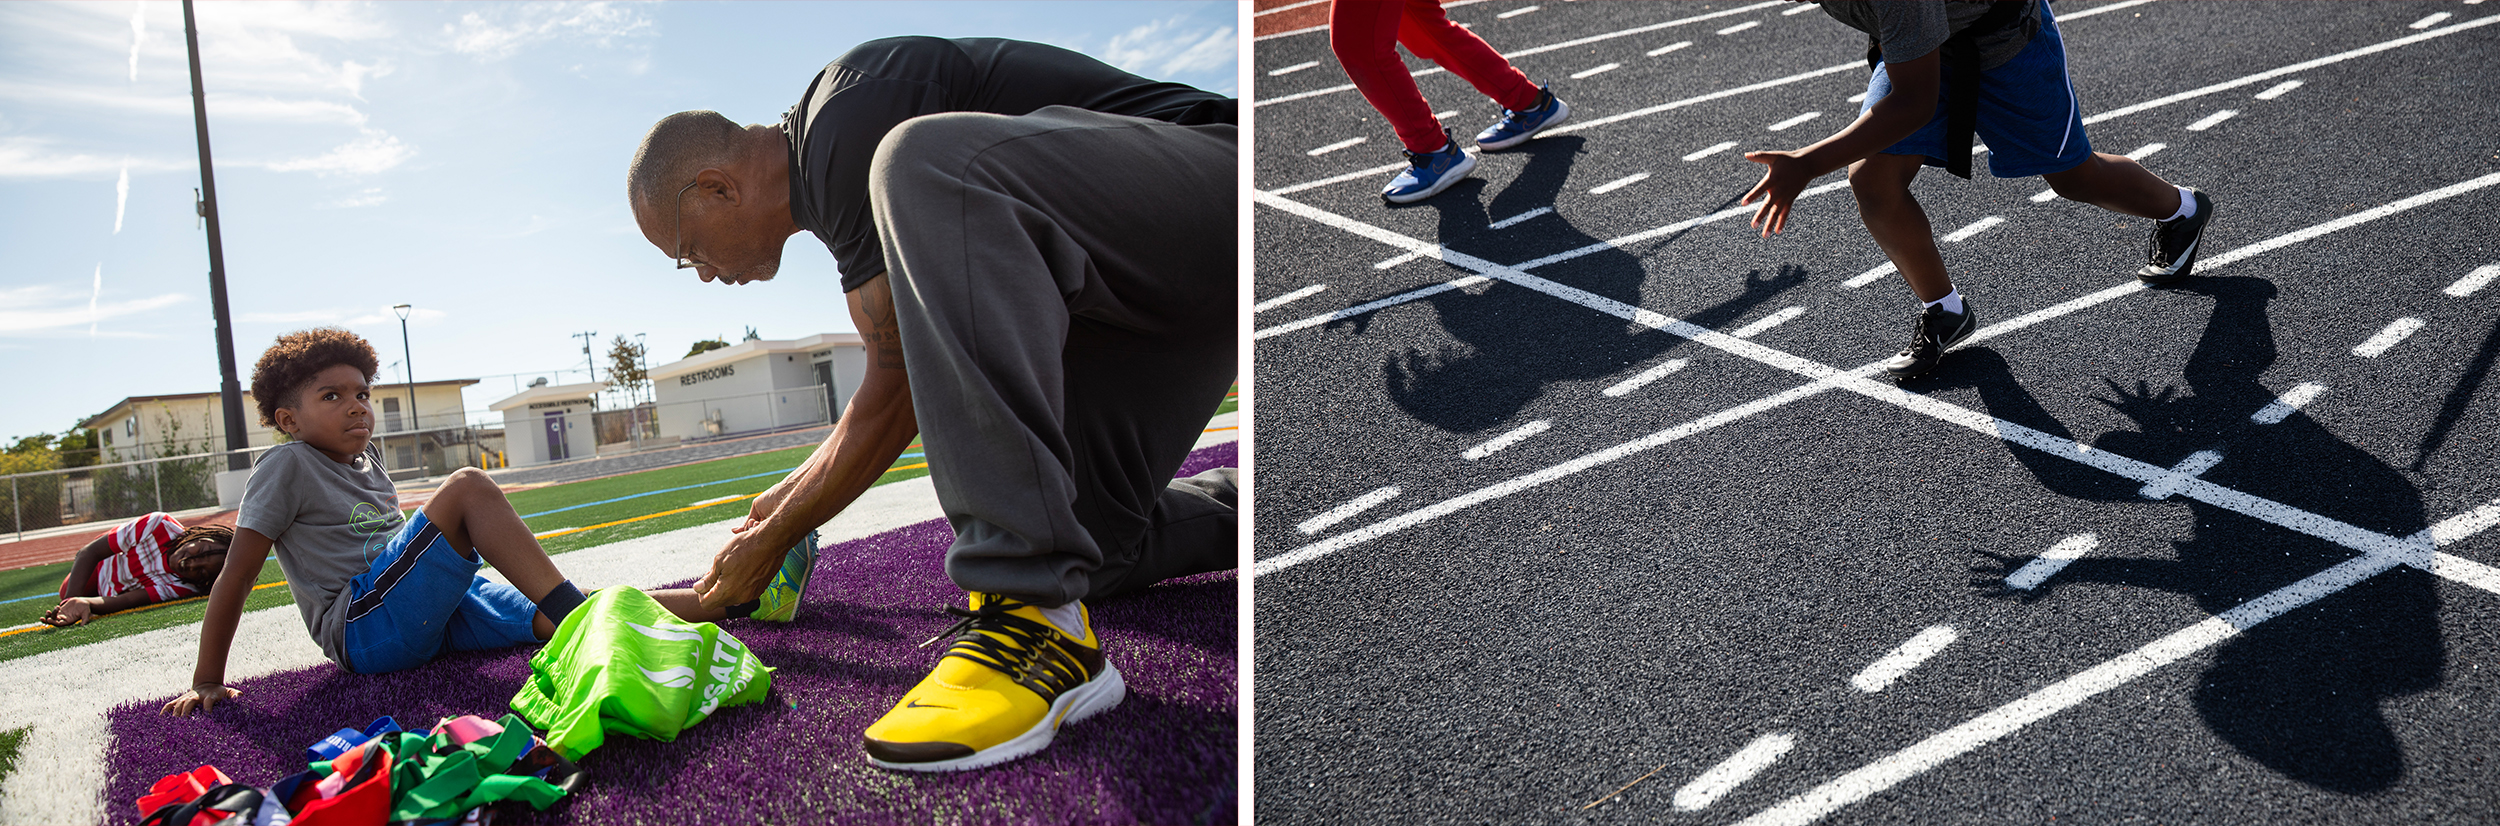 Two photos: On the left, an adult helps a child lace up their shots. On the right, the shadows of two children running are seen on a racetrack.